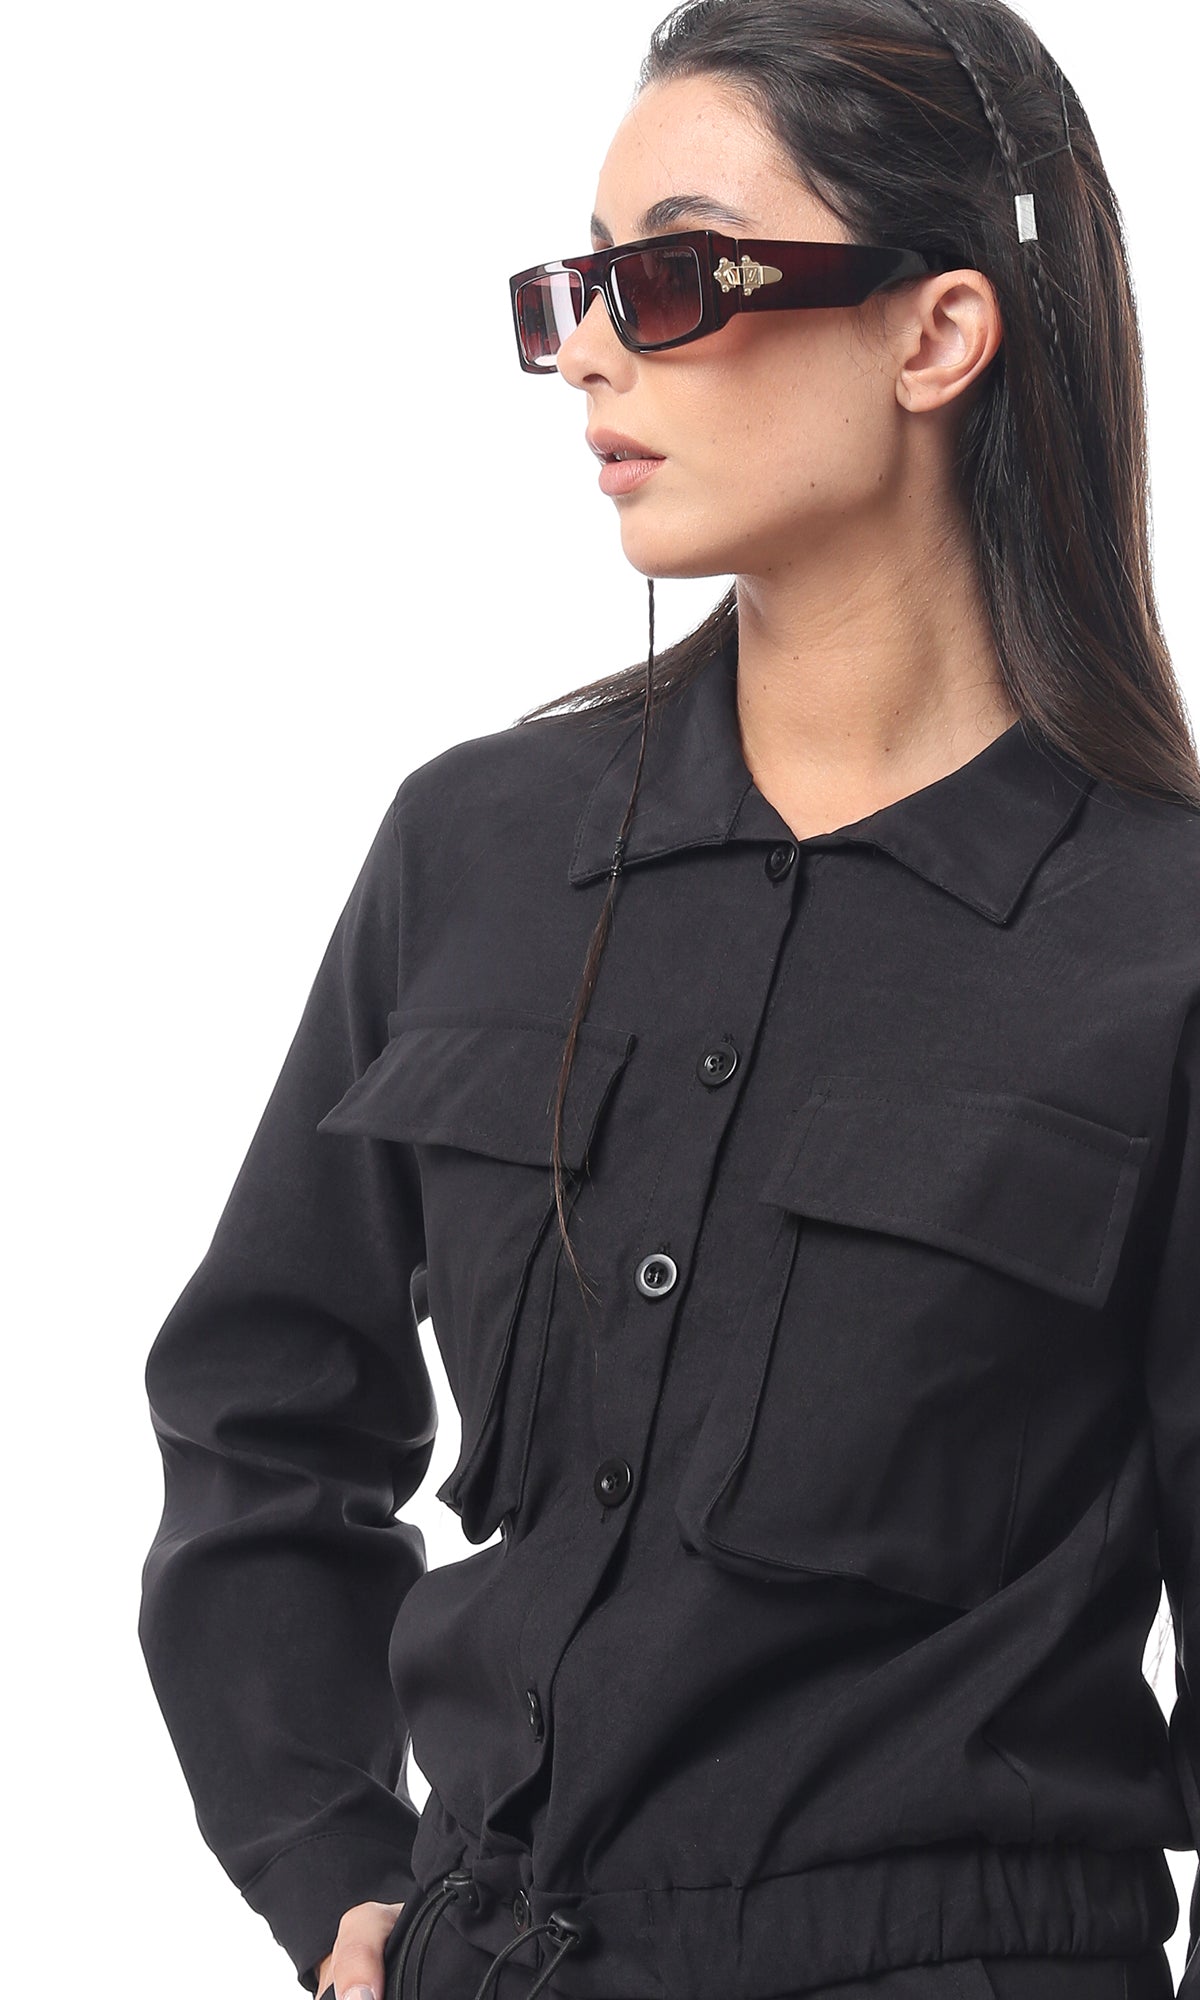 O170007 Buttoned Classic Black Turn Down Collar Jacket